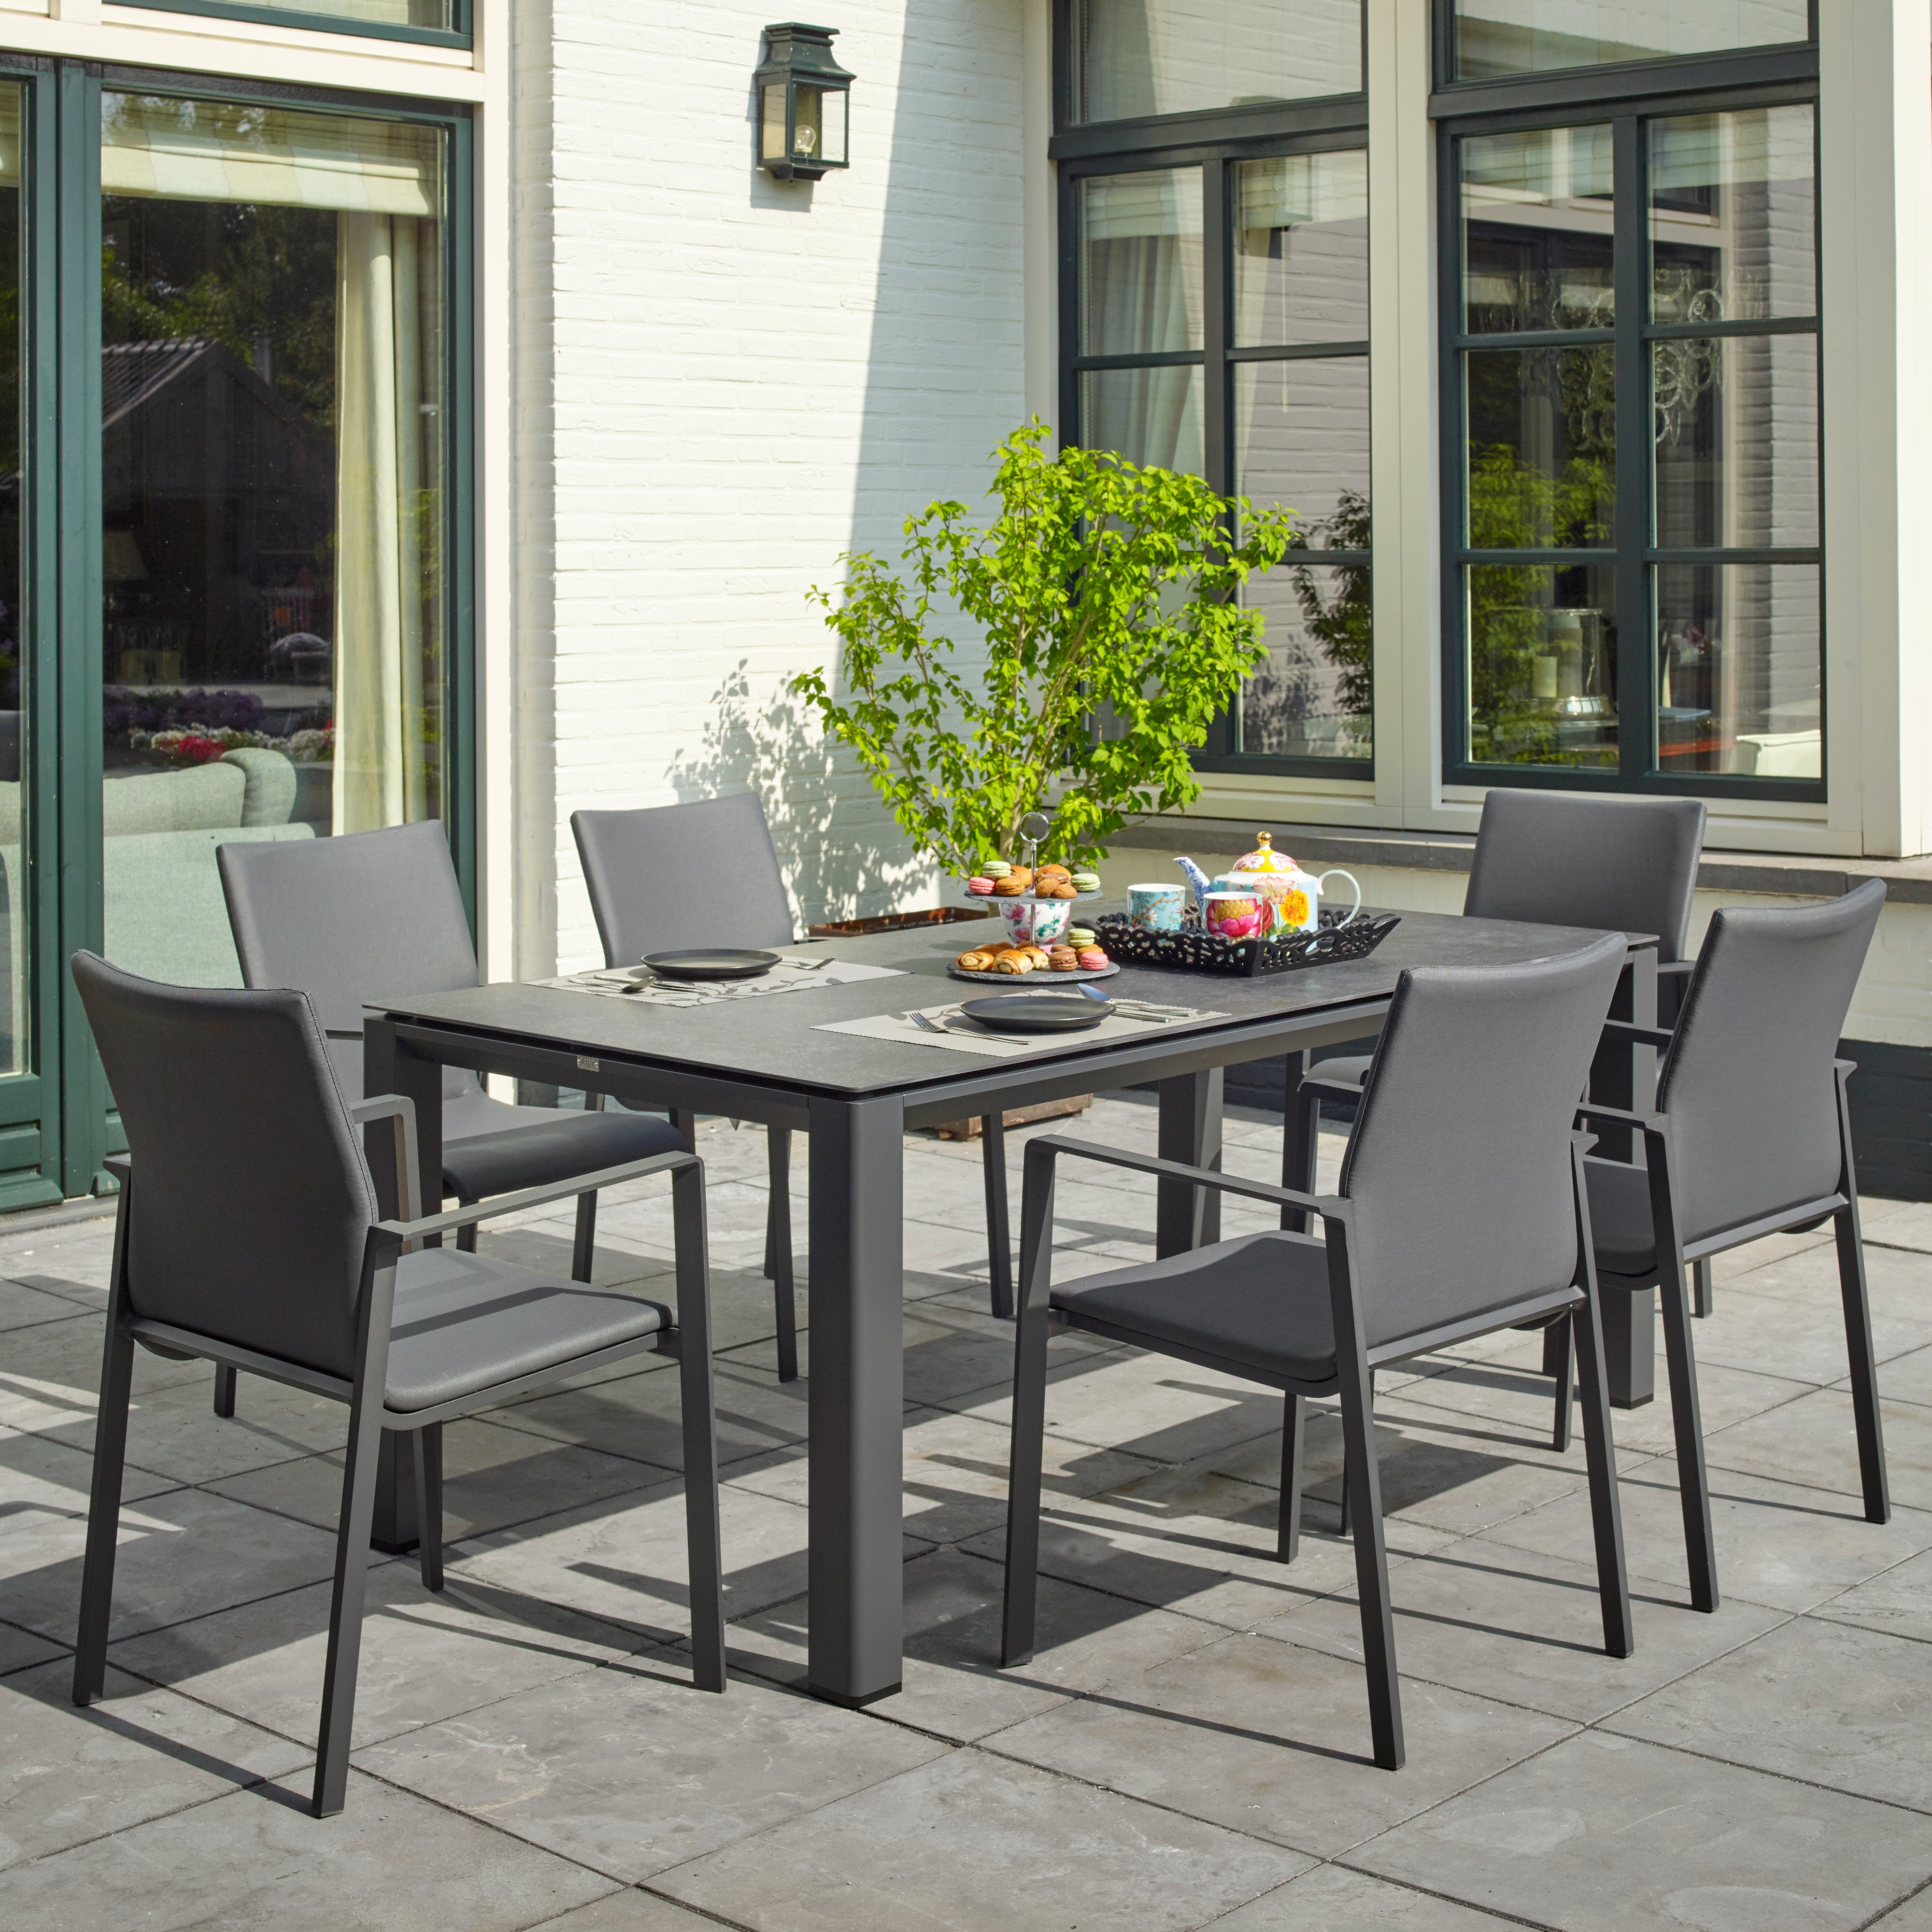 Dine alfresco in style with the Sense Dining Set. The sleek profile of the table and chairs give a clean, contemporary look. The dining chairs feature an aluminum frame with ergonomic arm rests and a comfortable all-weather sling with quick dry foam filling and all weather upholstery fabric. The ceramic top aluminum table is sturdy and weather resistant, ensuring years of outdoor dining enjoyment.